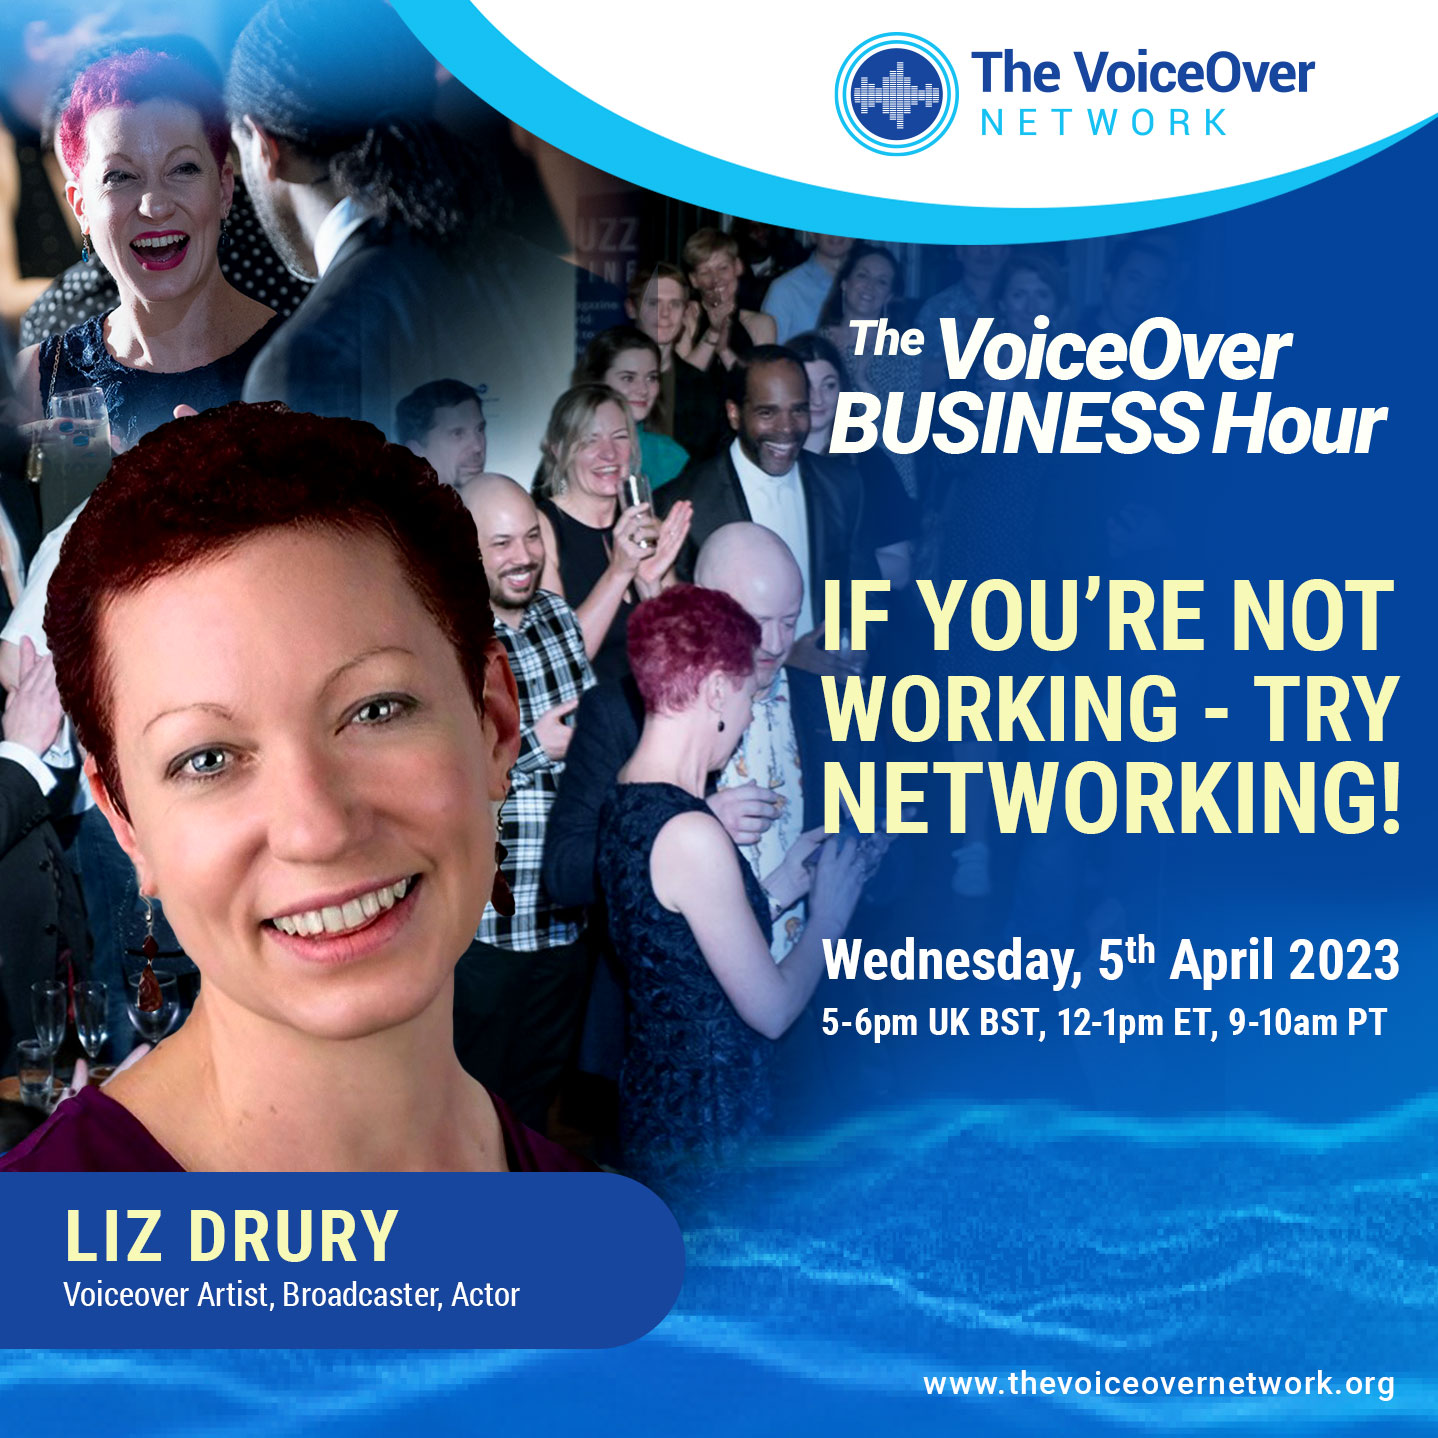 The VoiceOver Business Hour, ‘If you’re not working - try networking!’ with Liz Drury